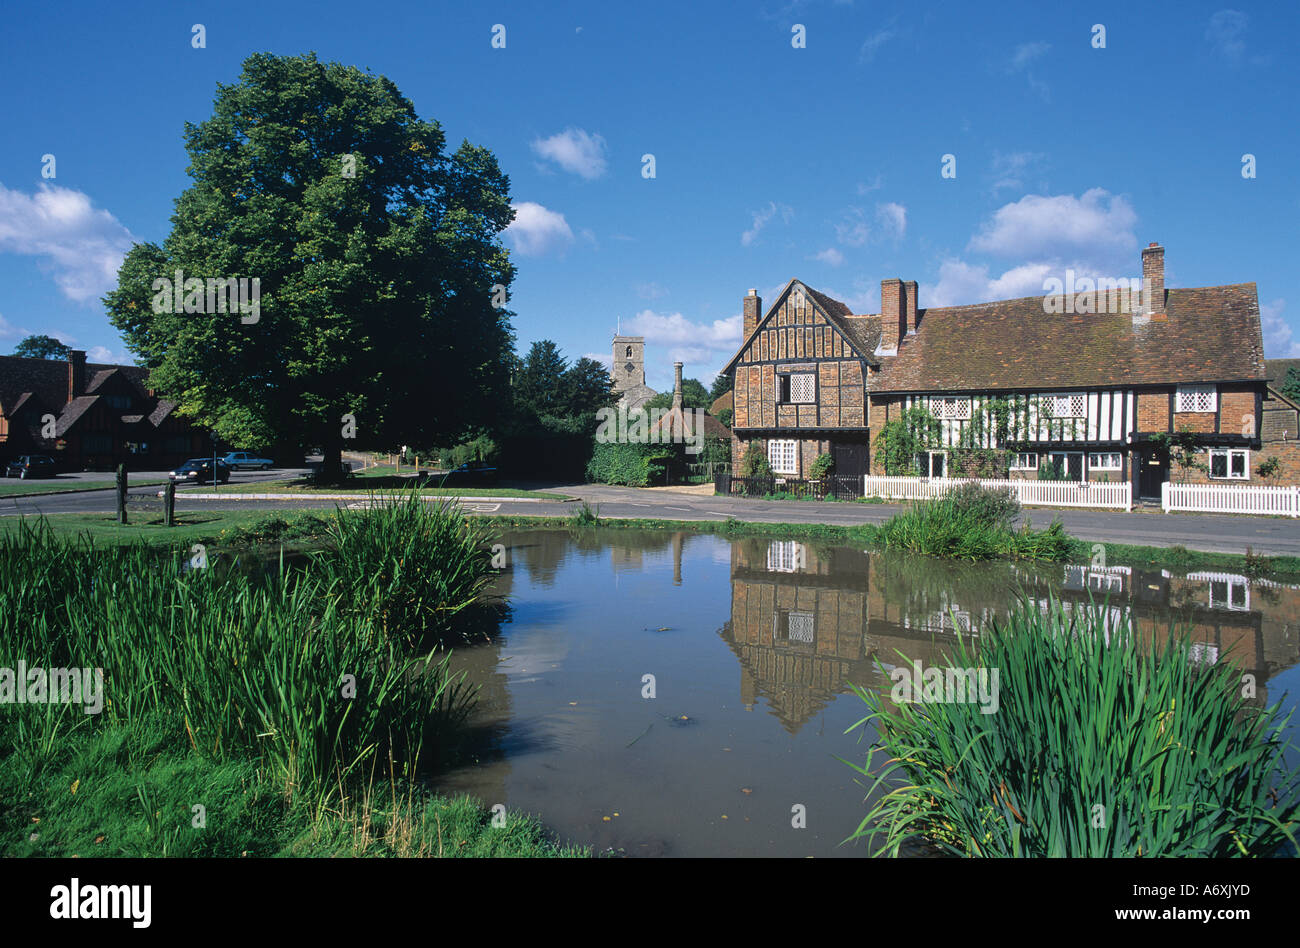 Aldbury Hertfordshire Duck pond with The Manor House and the old village stocks Stock Photo